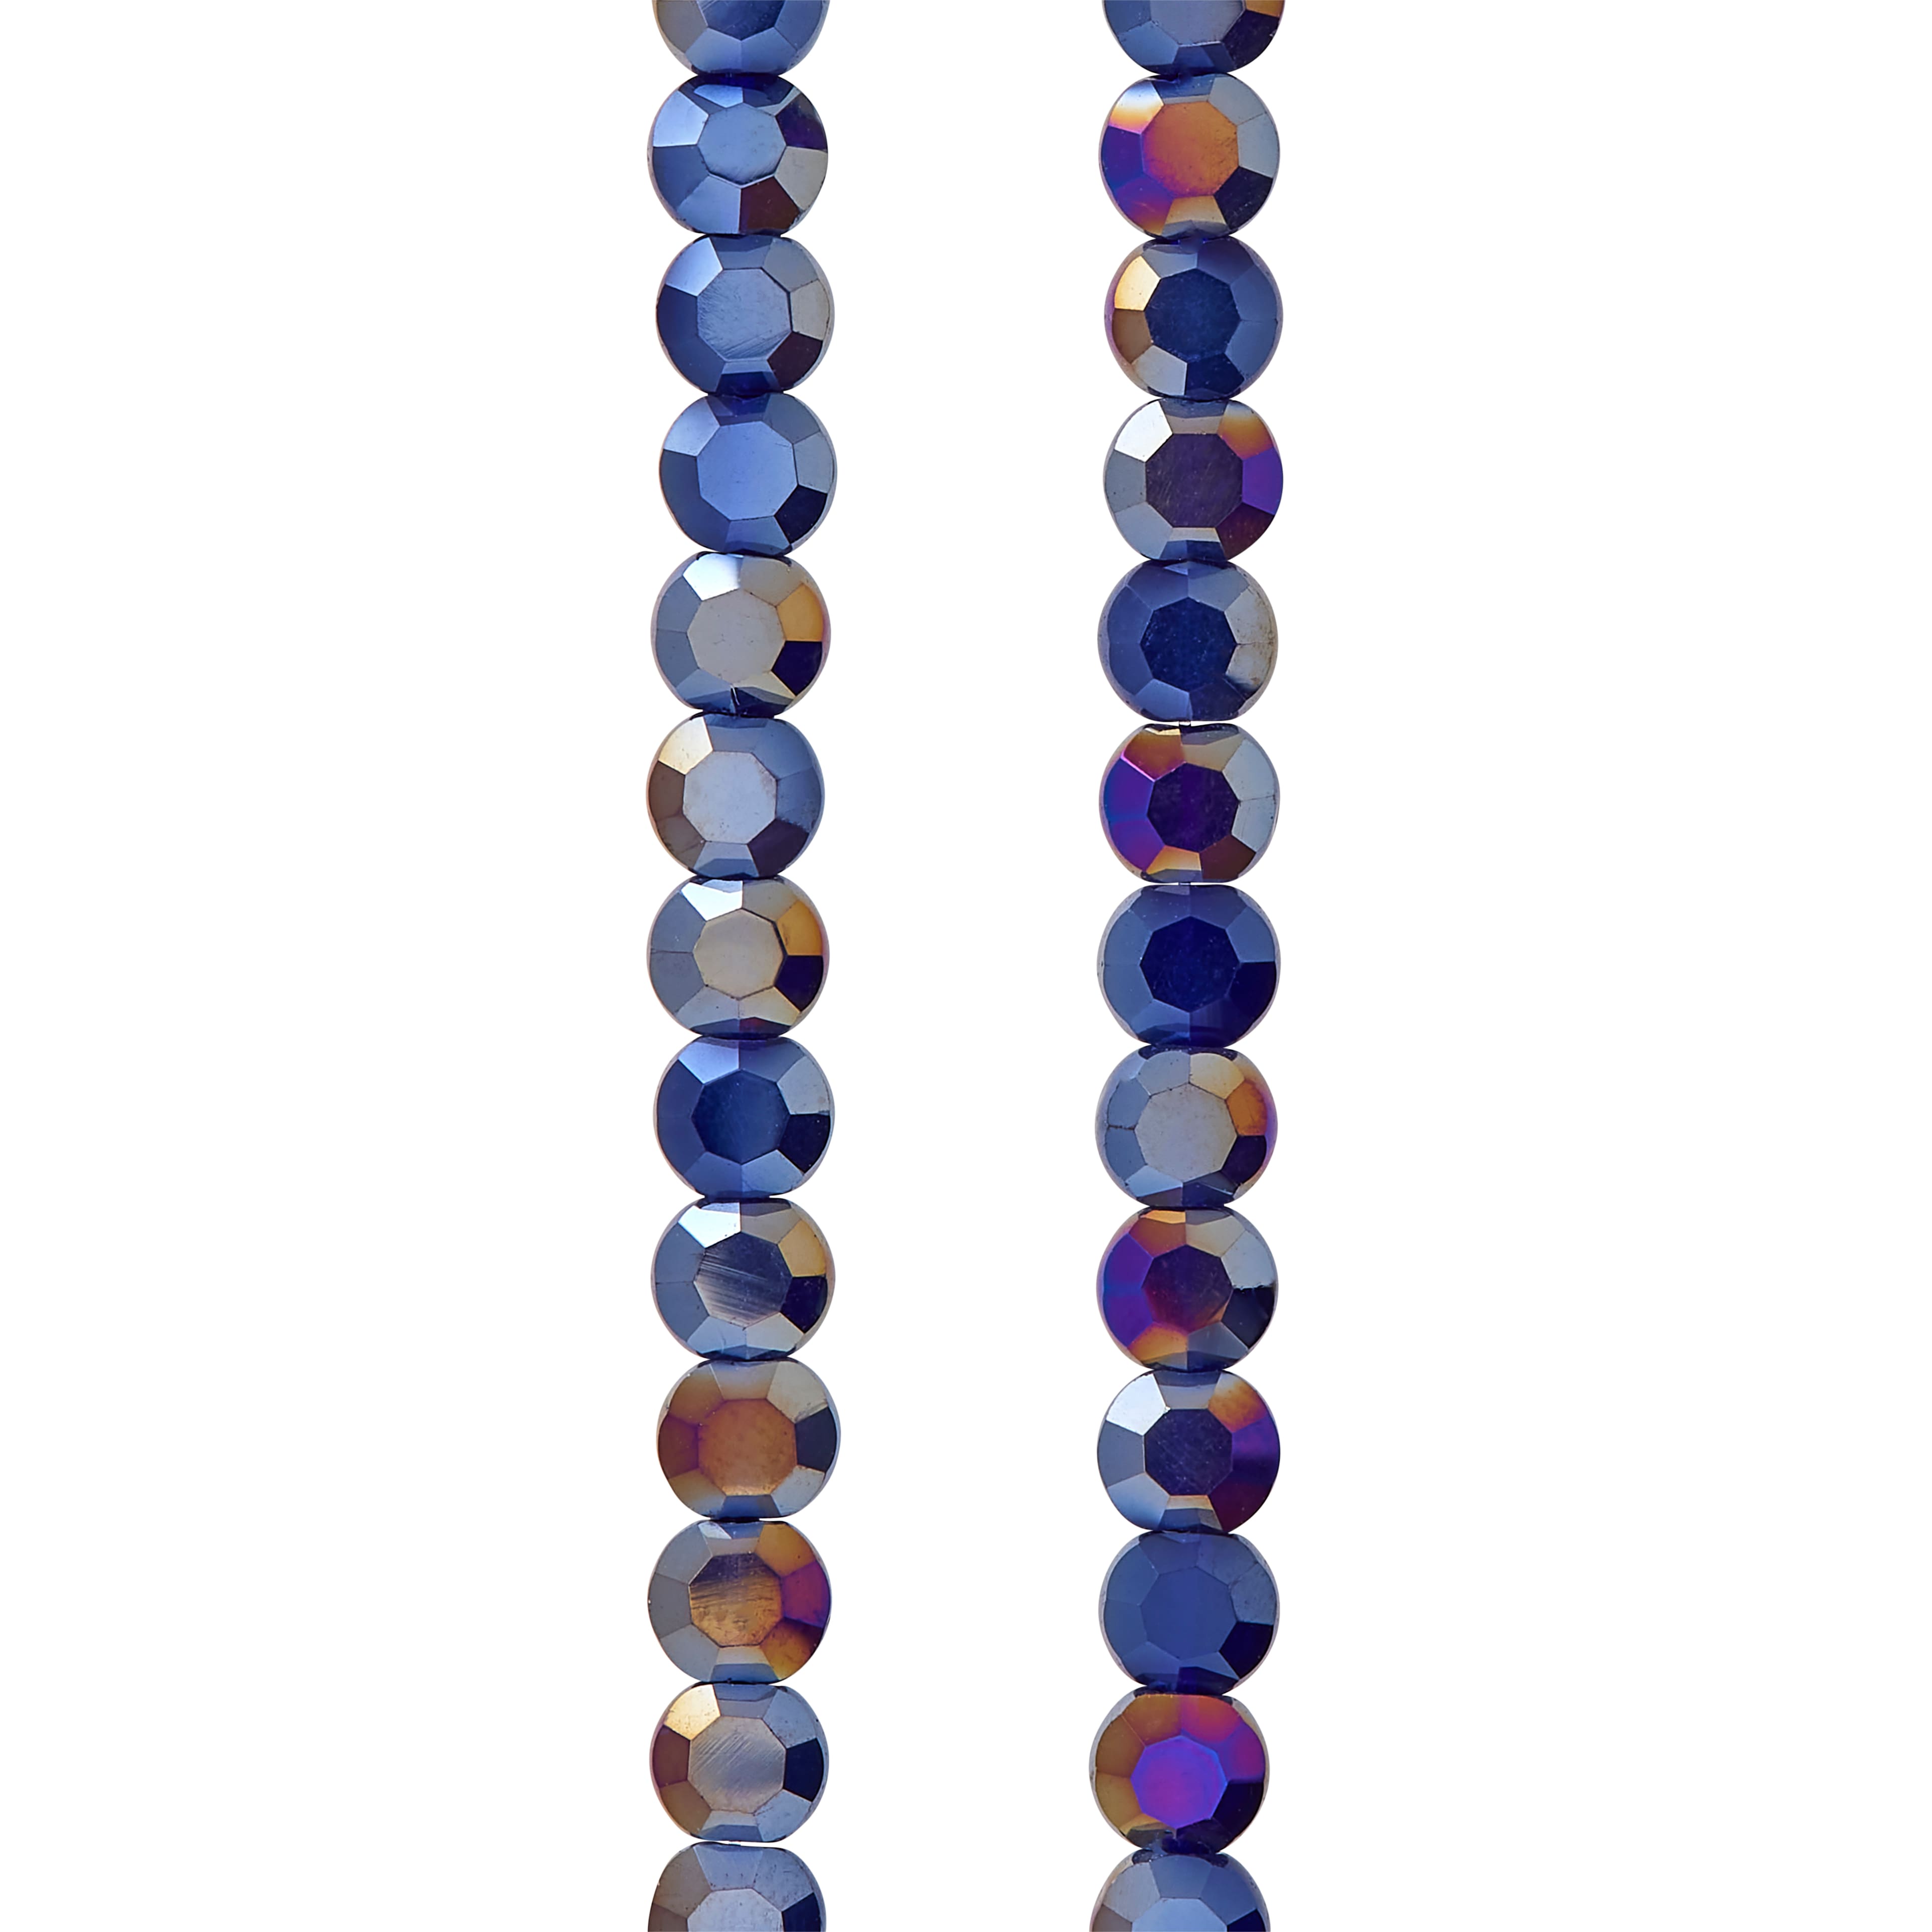 12 Pack: Dark Blue Silverite Opaque Flat Round Glass Beads, 6mm by